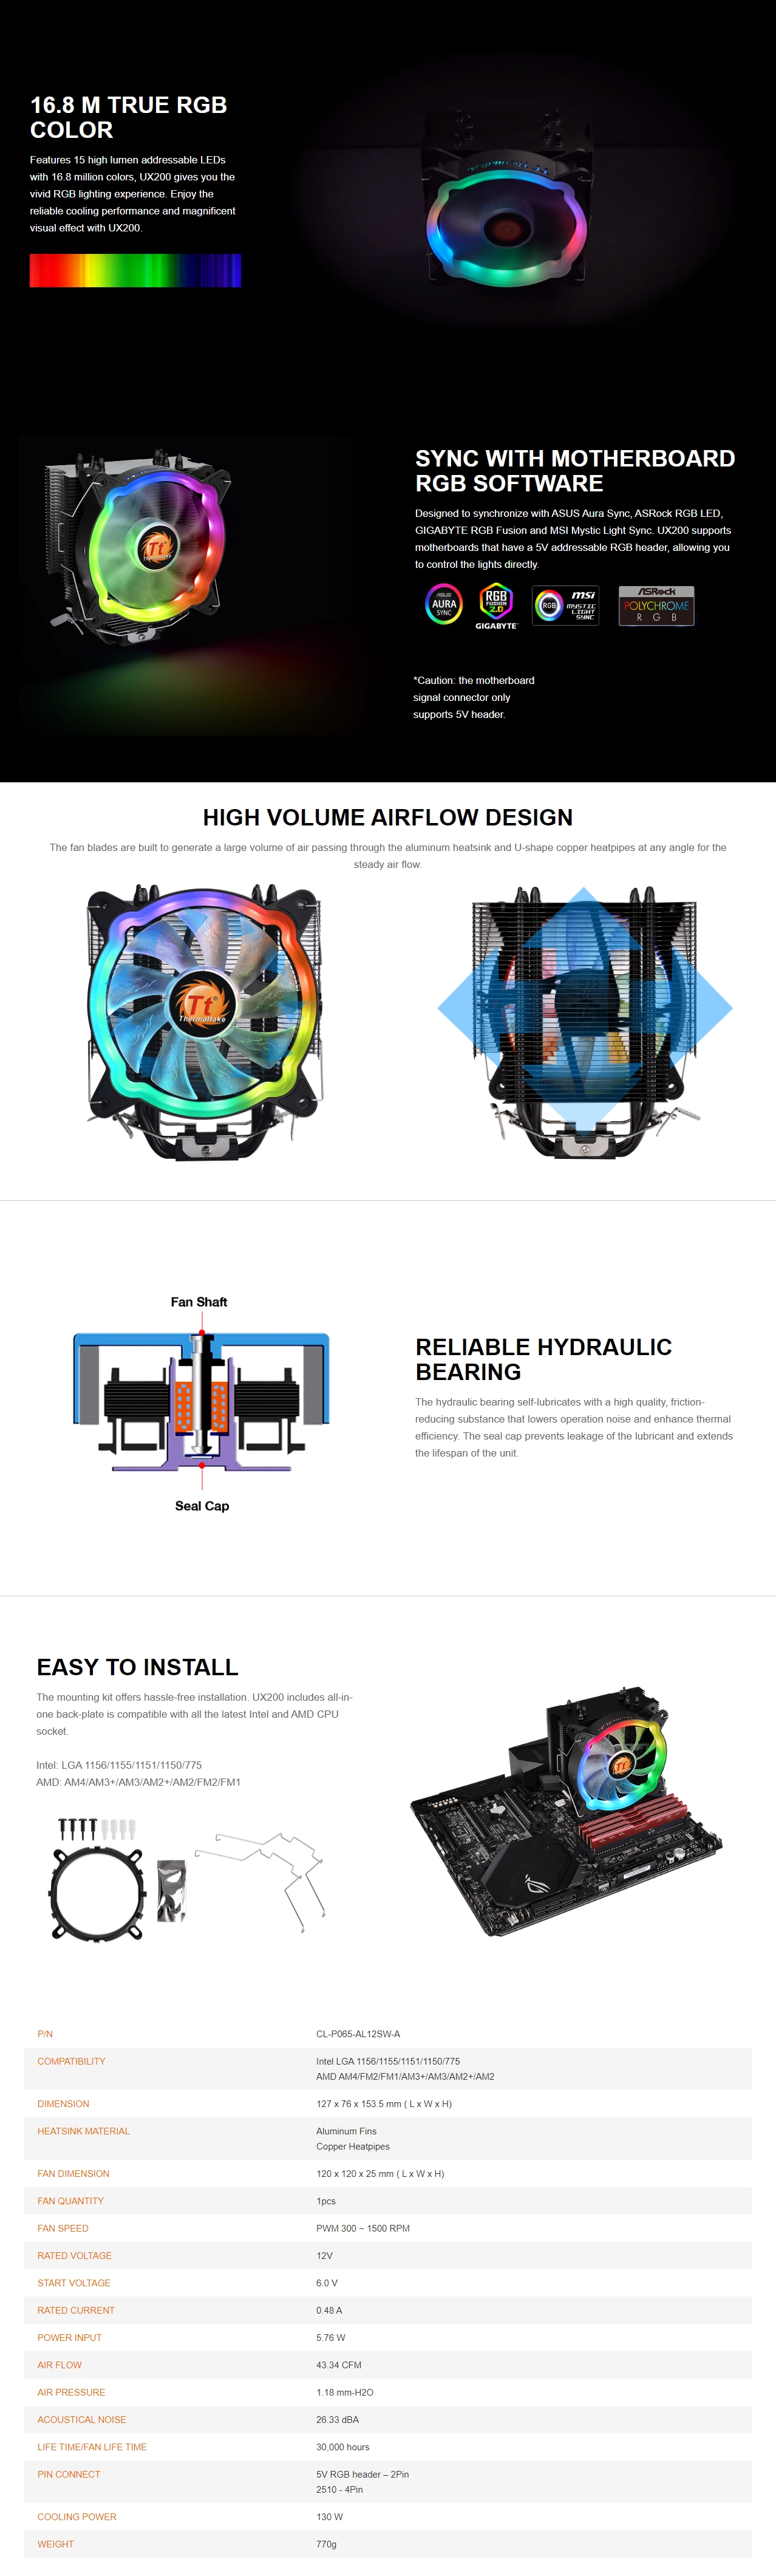 A large marketing image providing additional information about the product Thermaltake UX200 - ARGB CPU Cooler - Additional alt info not provided